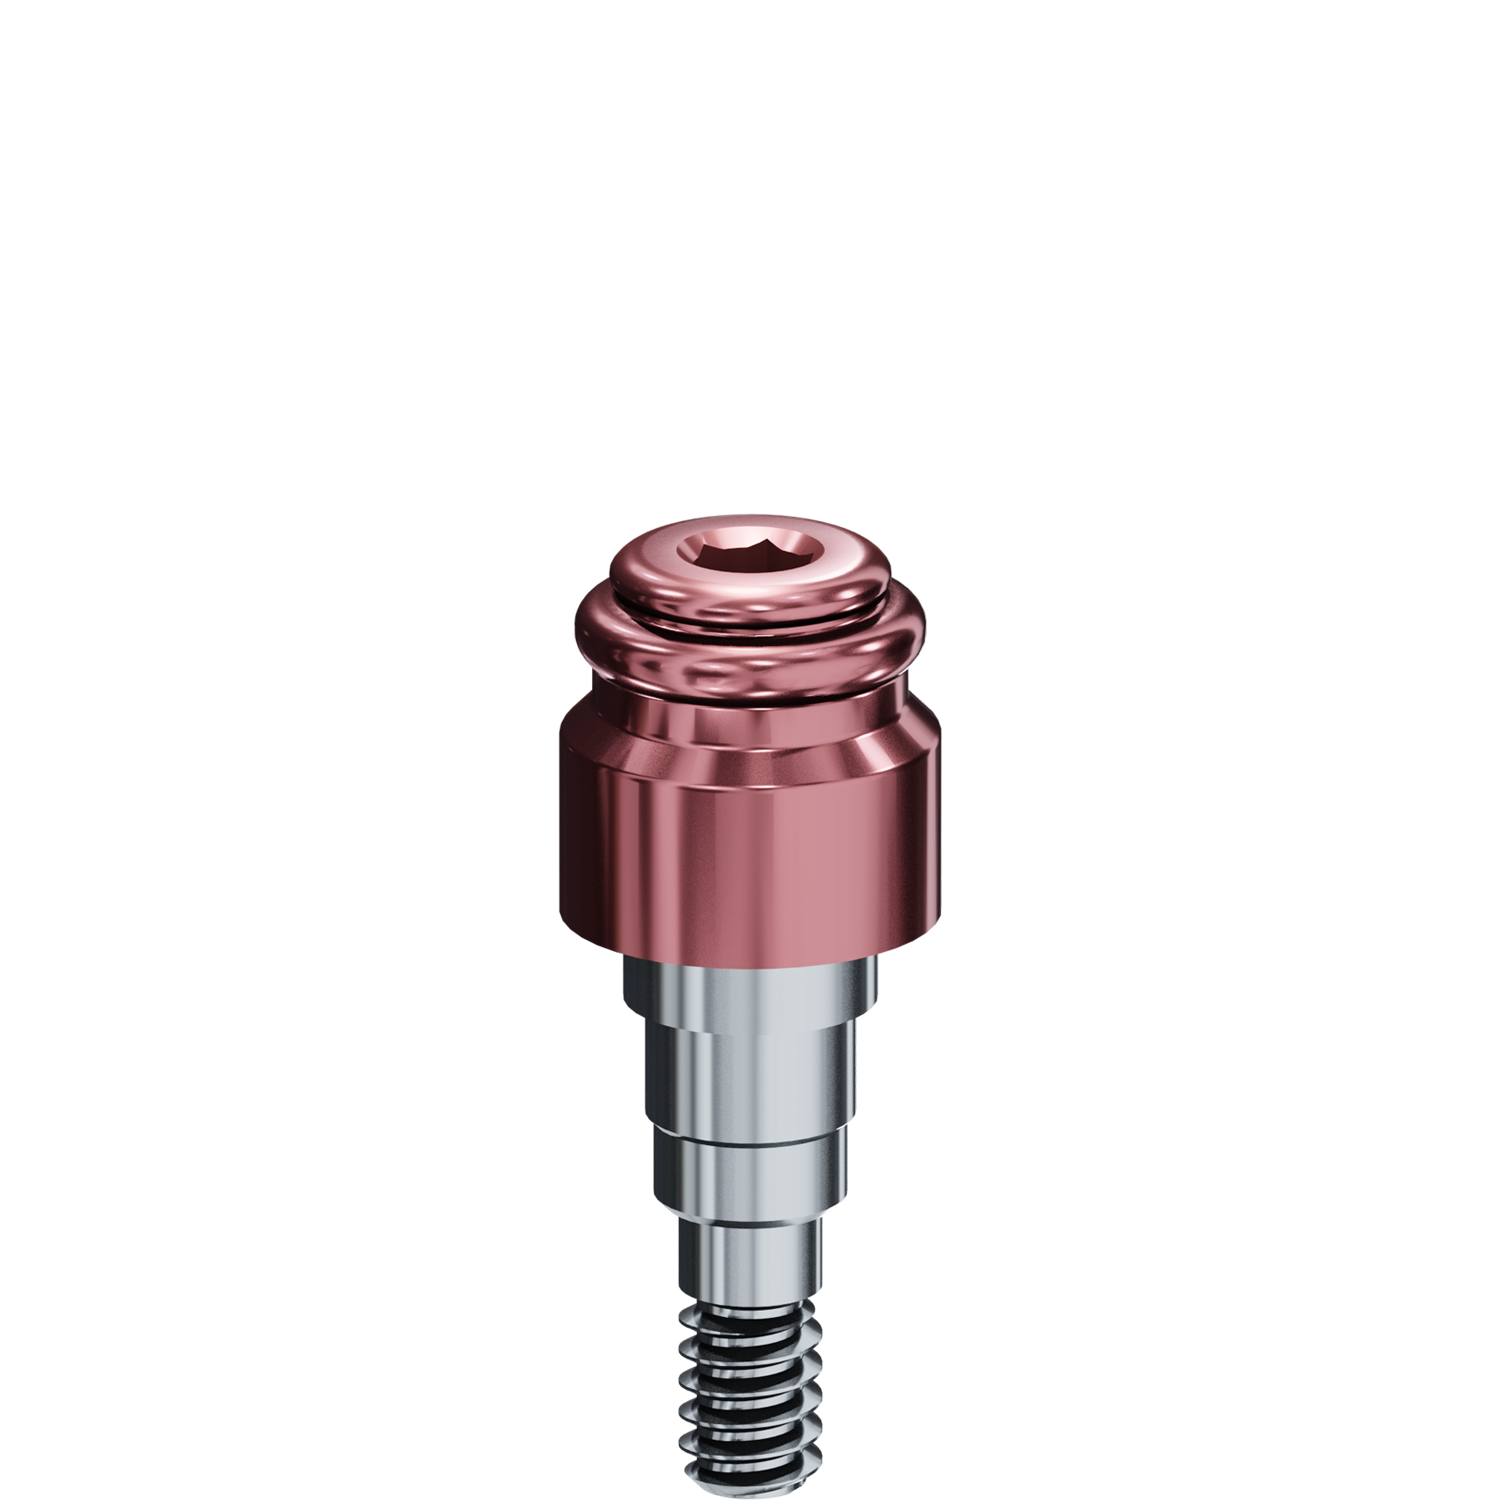 R-Tx Attachment System - Biomet 3i® - 4.1mm Certain Connection - 0.048" Drive - 6.0mm